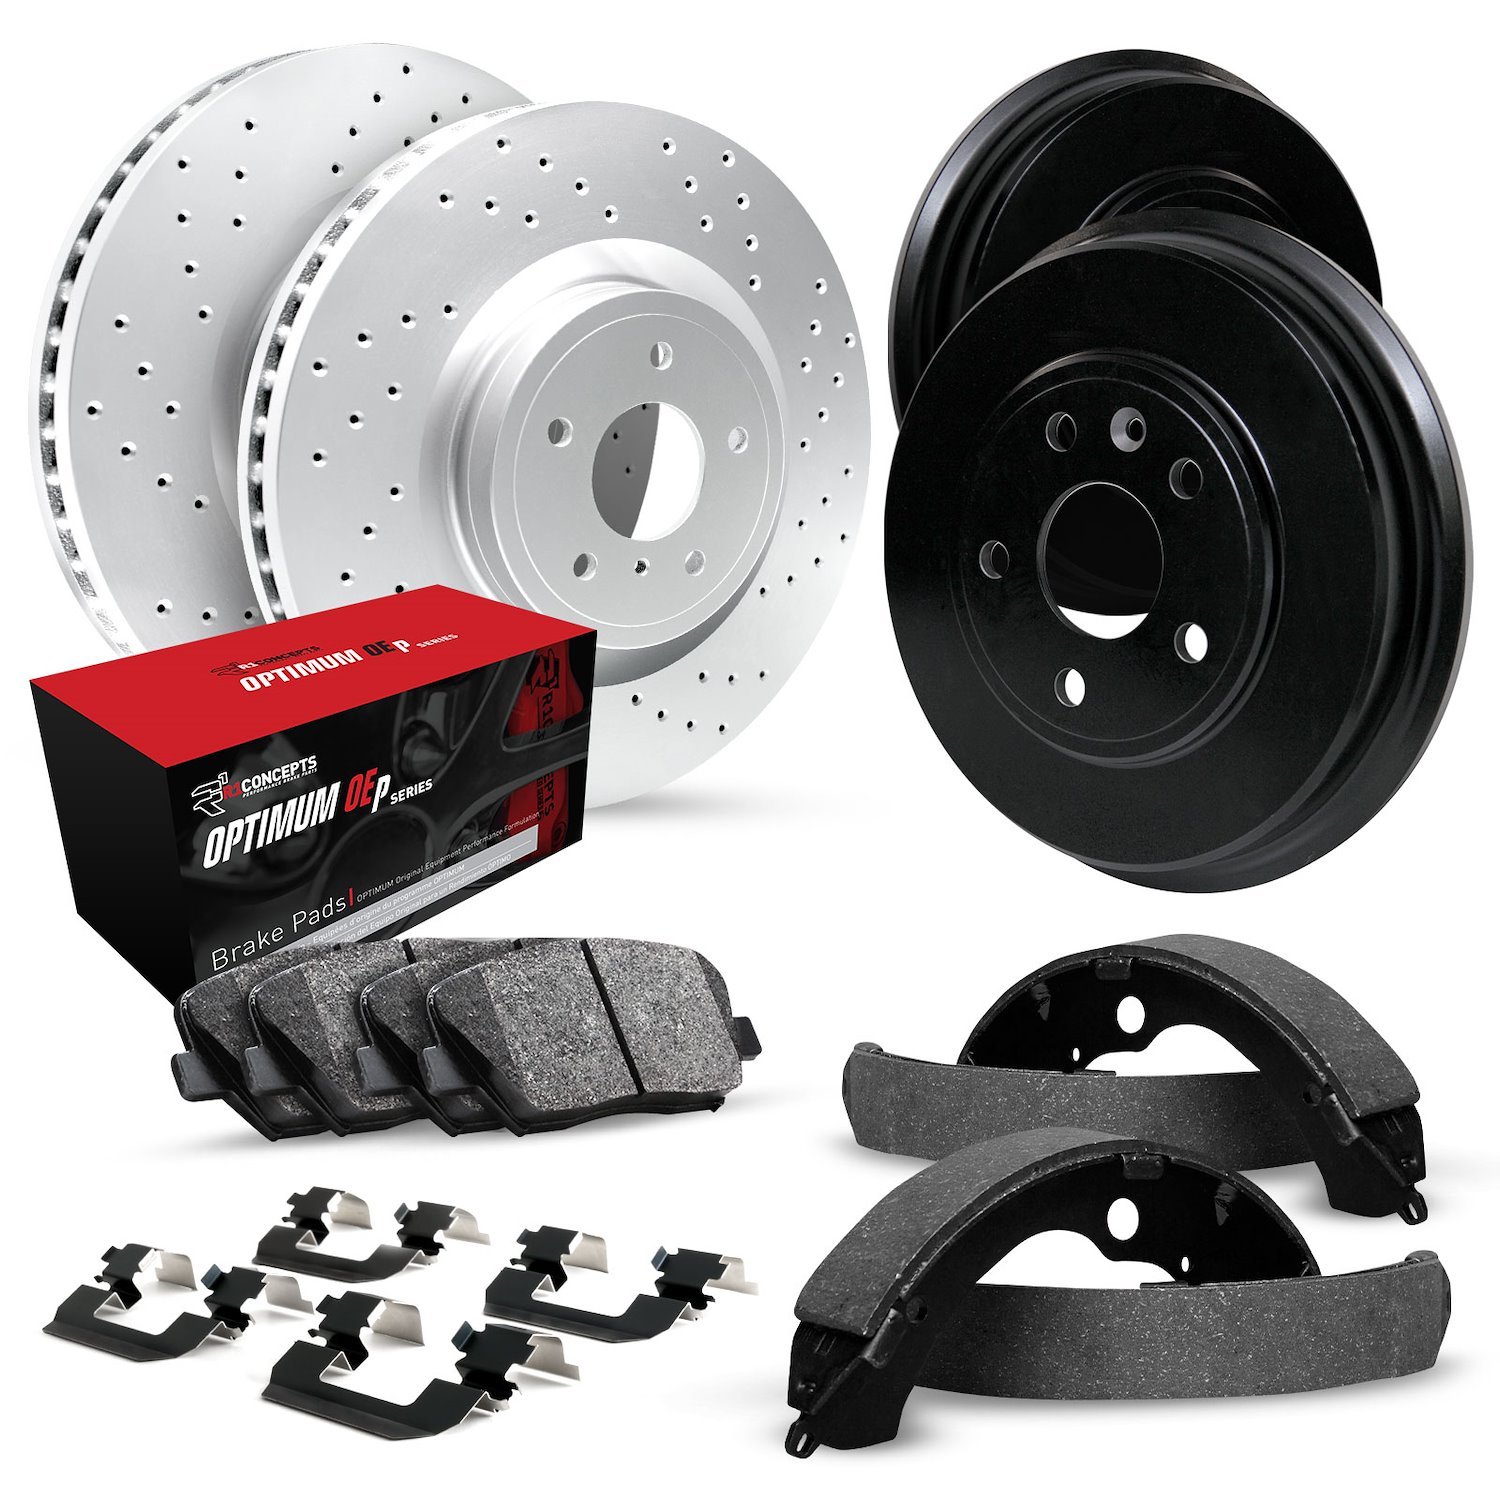 GEO-Carbon Drilled Brake Rotor & Drum Set w/Optimum OE Pads, Shoes, & Hardware, 1992-1993 GM, Position: Front & Rear